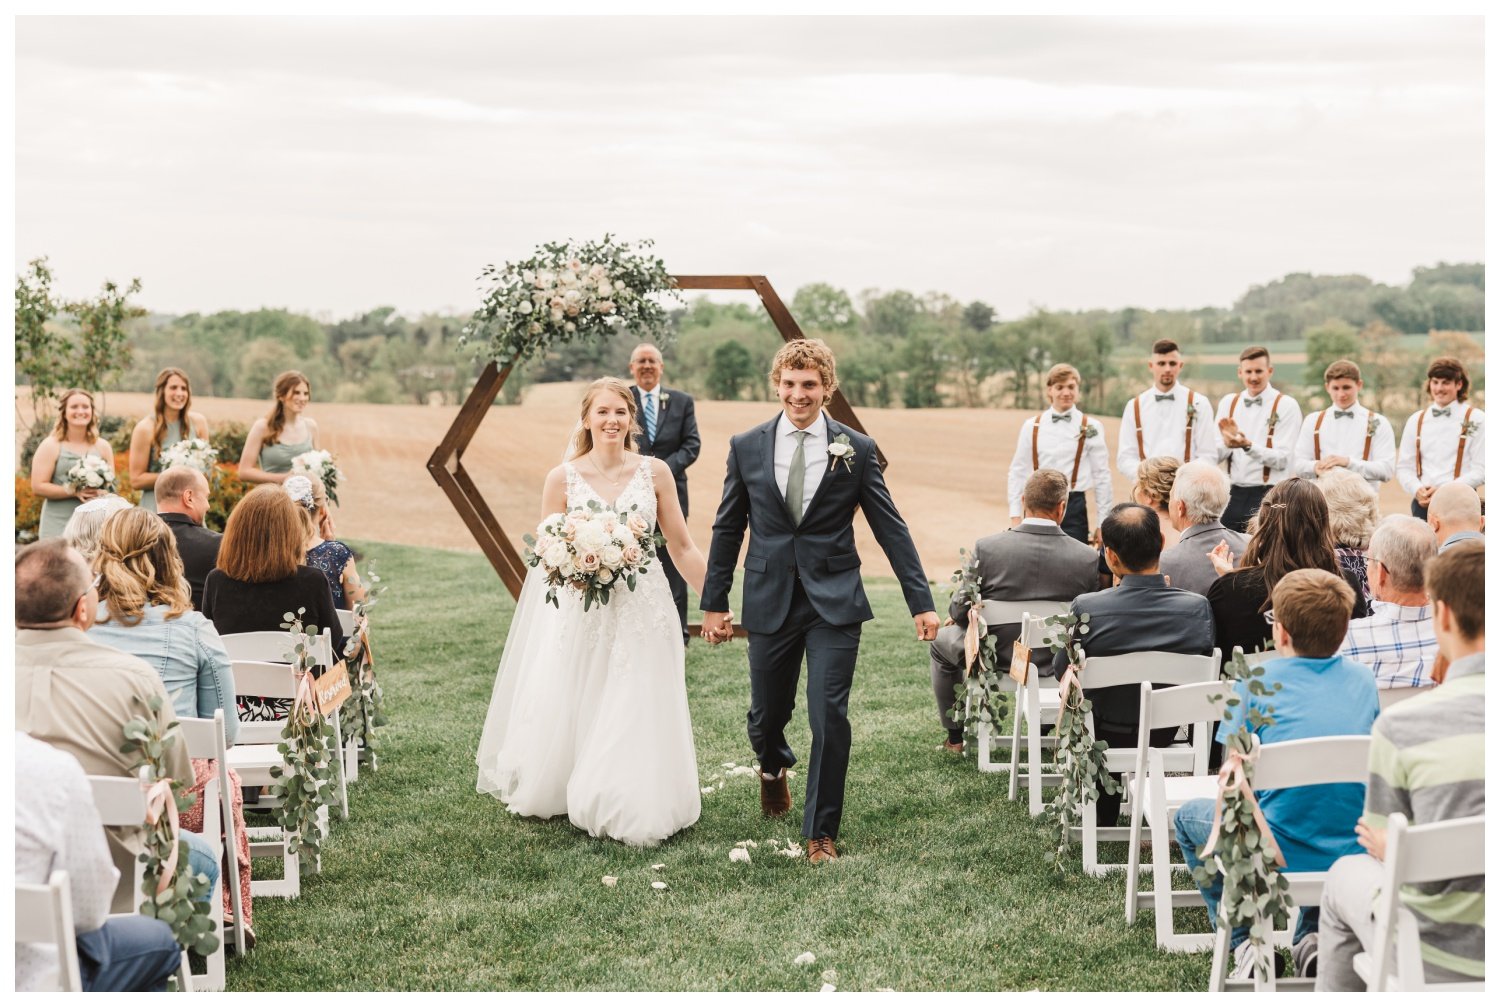 Harvest View Barn at Hershey Farms Wedding, Elizabethtown, PA, outdoor ceremony